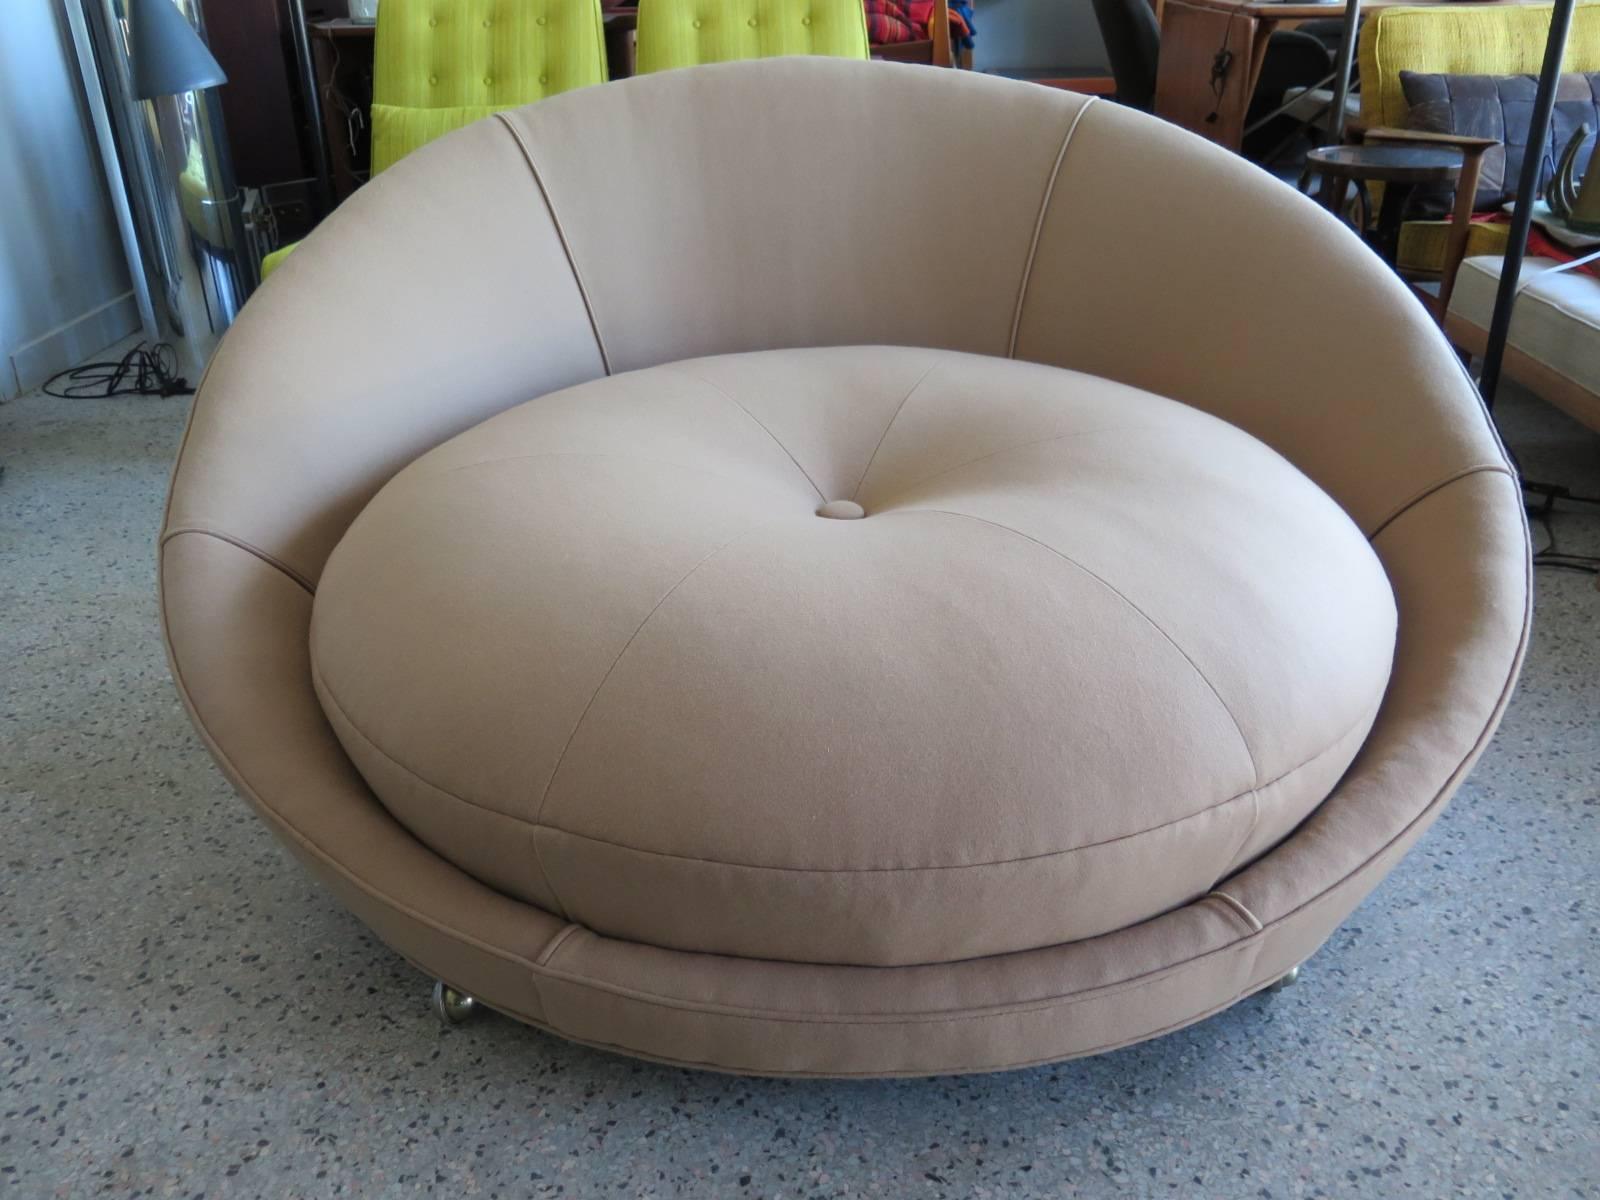 Fantastic and fun large round chair by Milo Baughman, shaped like a button. New wool upholstery.